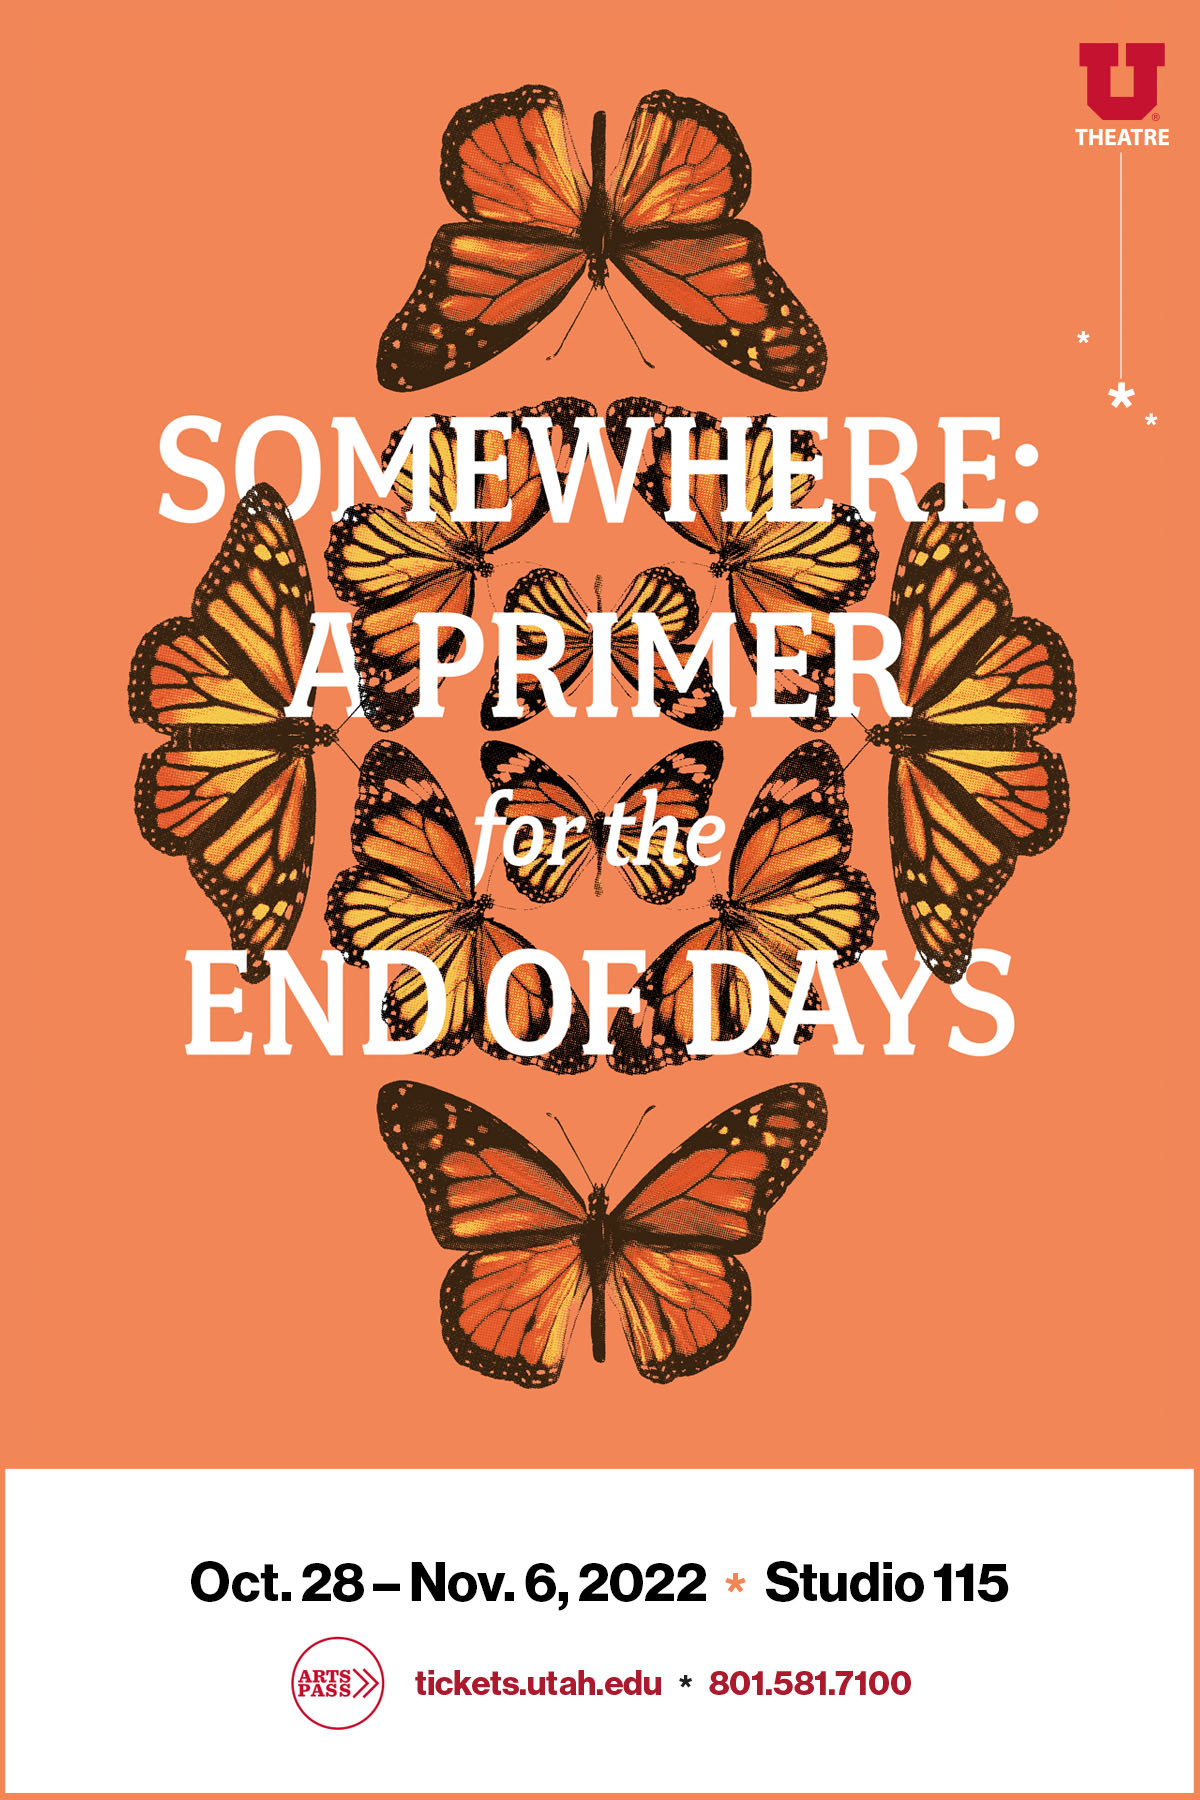 Somewhere: a Primer for the End of Days